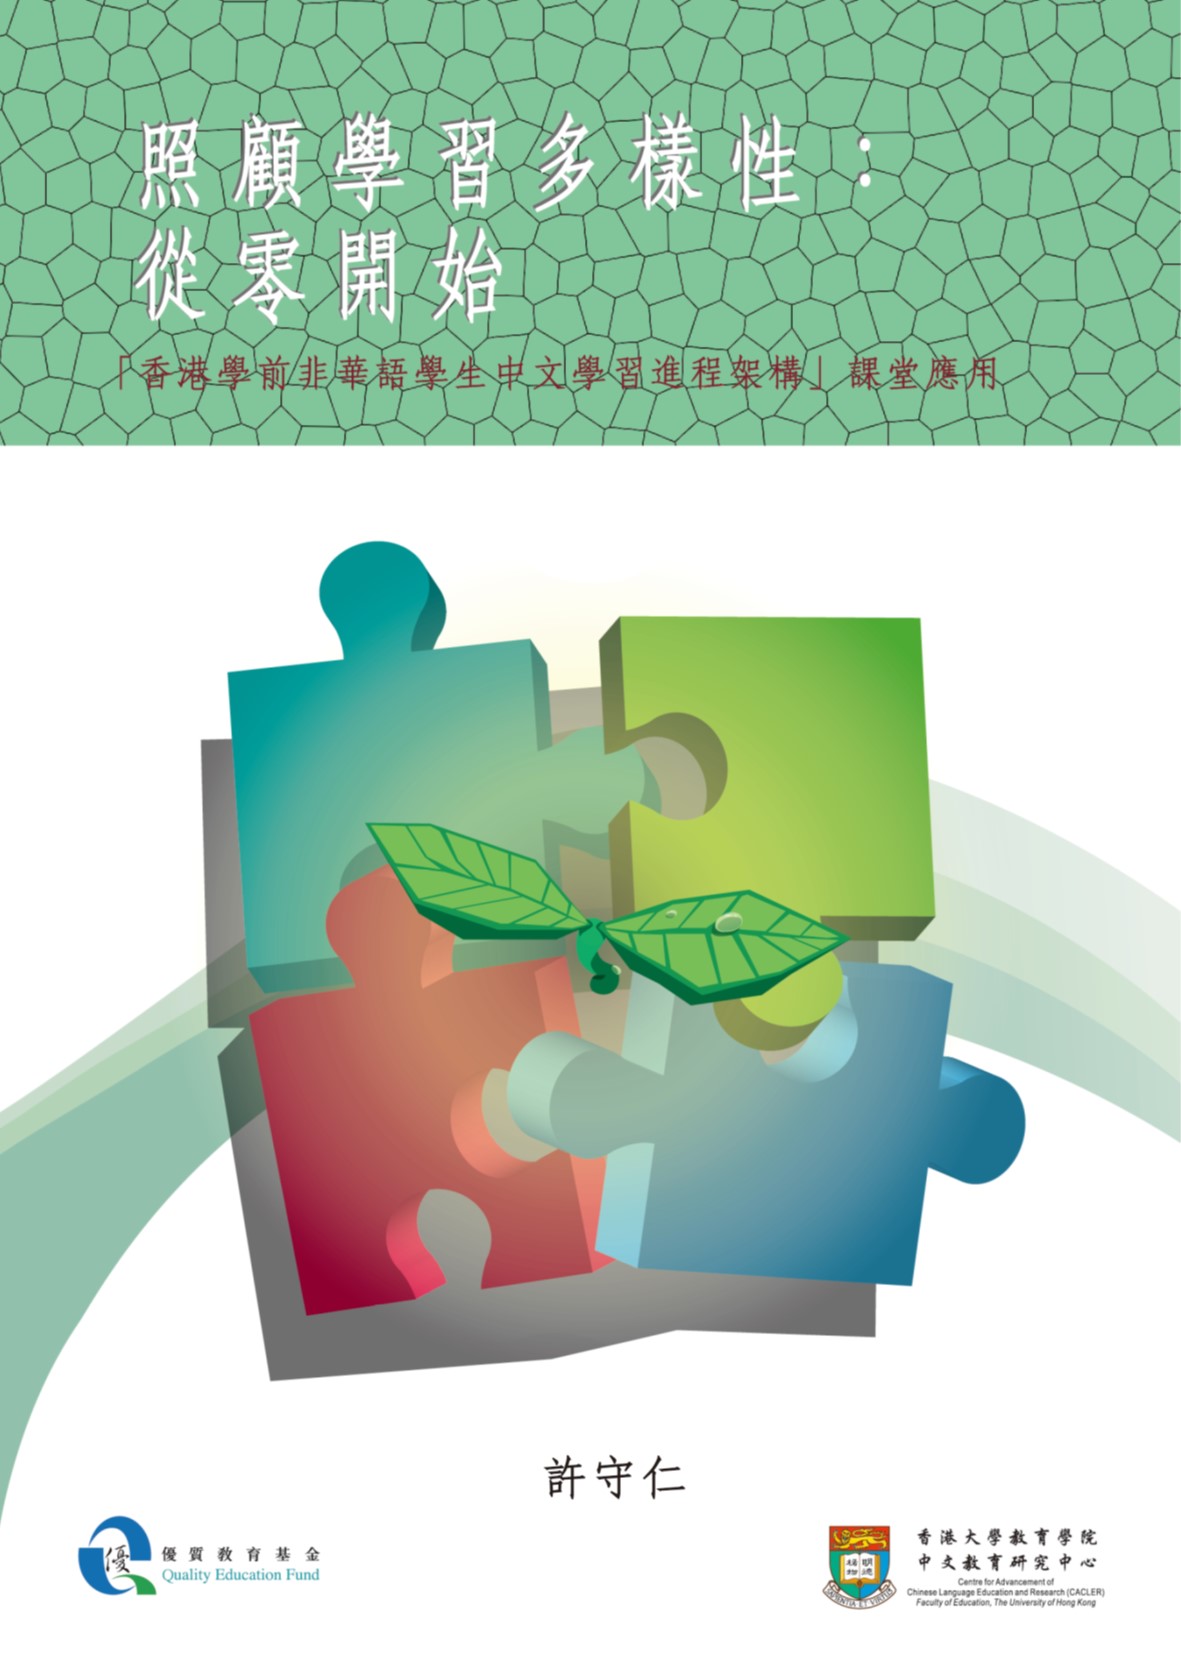 Catering for learner diversity from the beginning: A handbook on the application of the “Chinese Language Learning Progression Framework for Non-Chinese Speaking Children in Kindergartens in Hong Kong&quot;